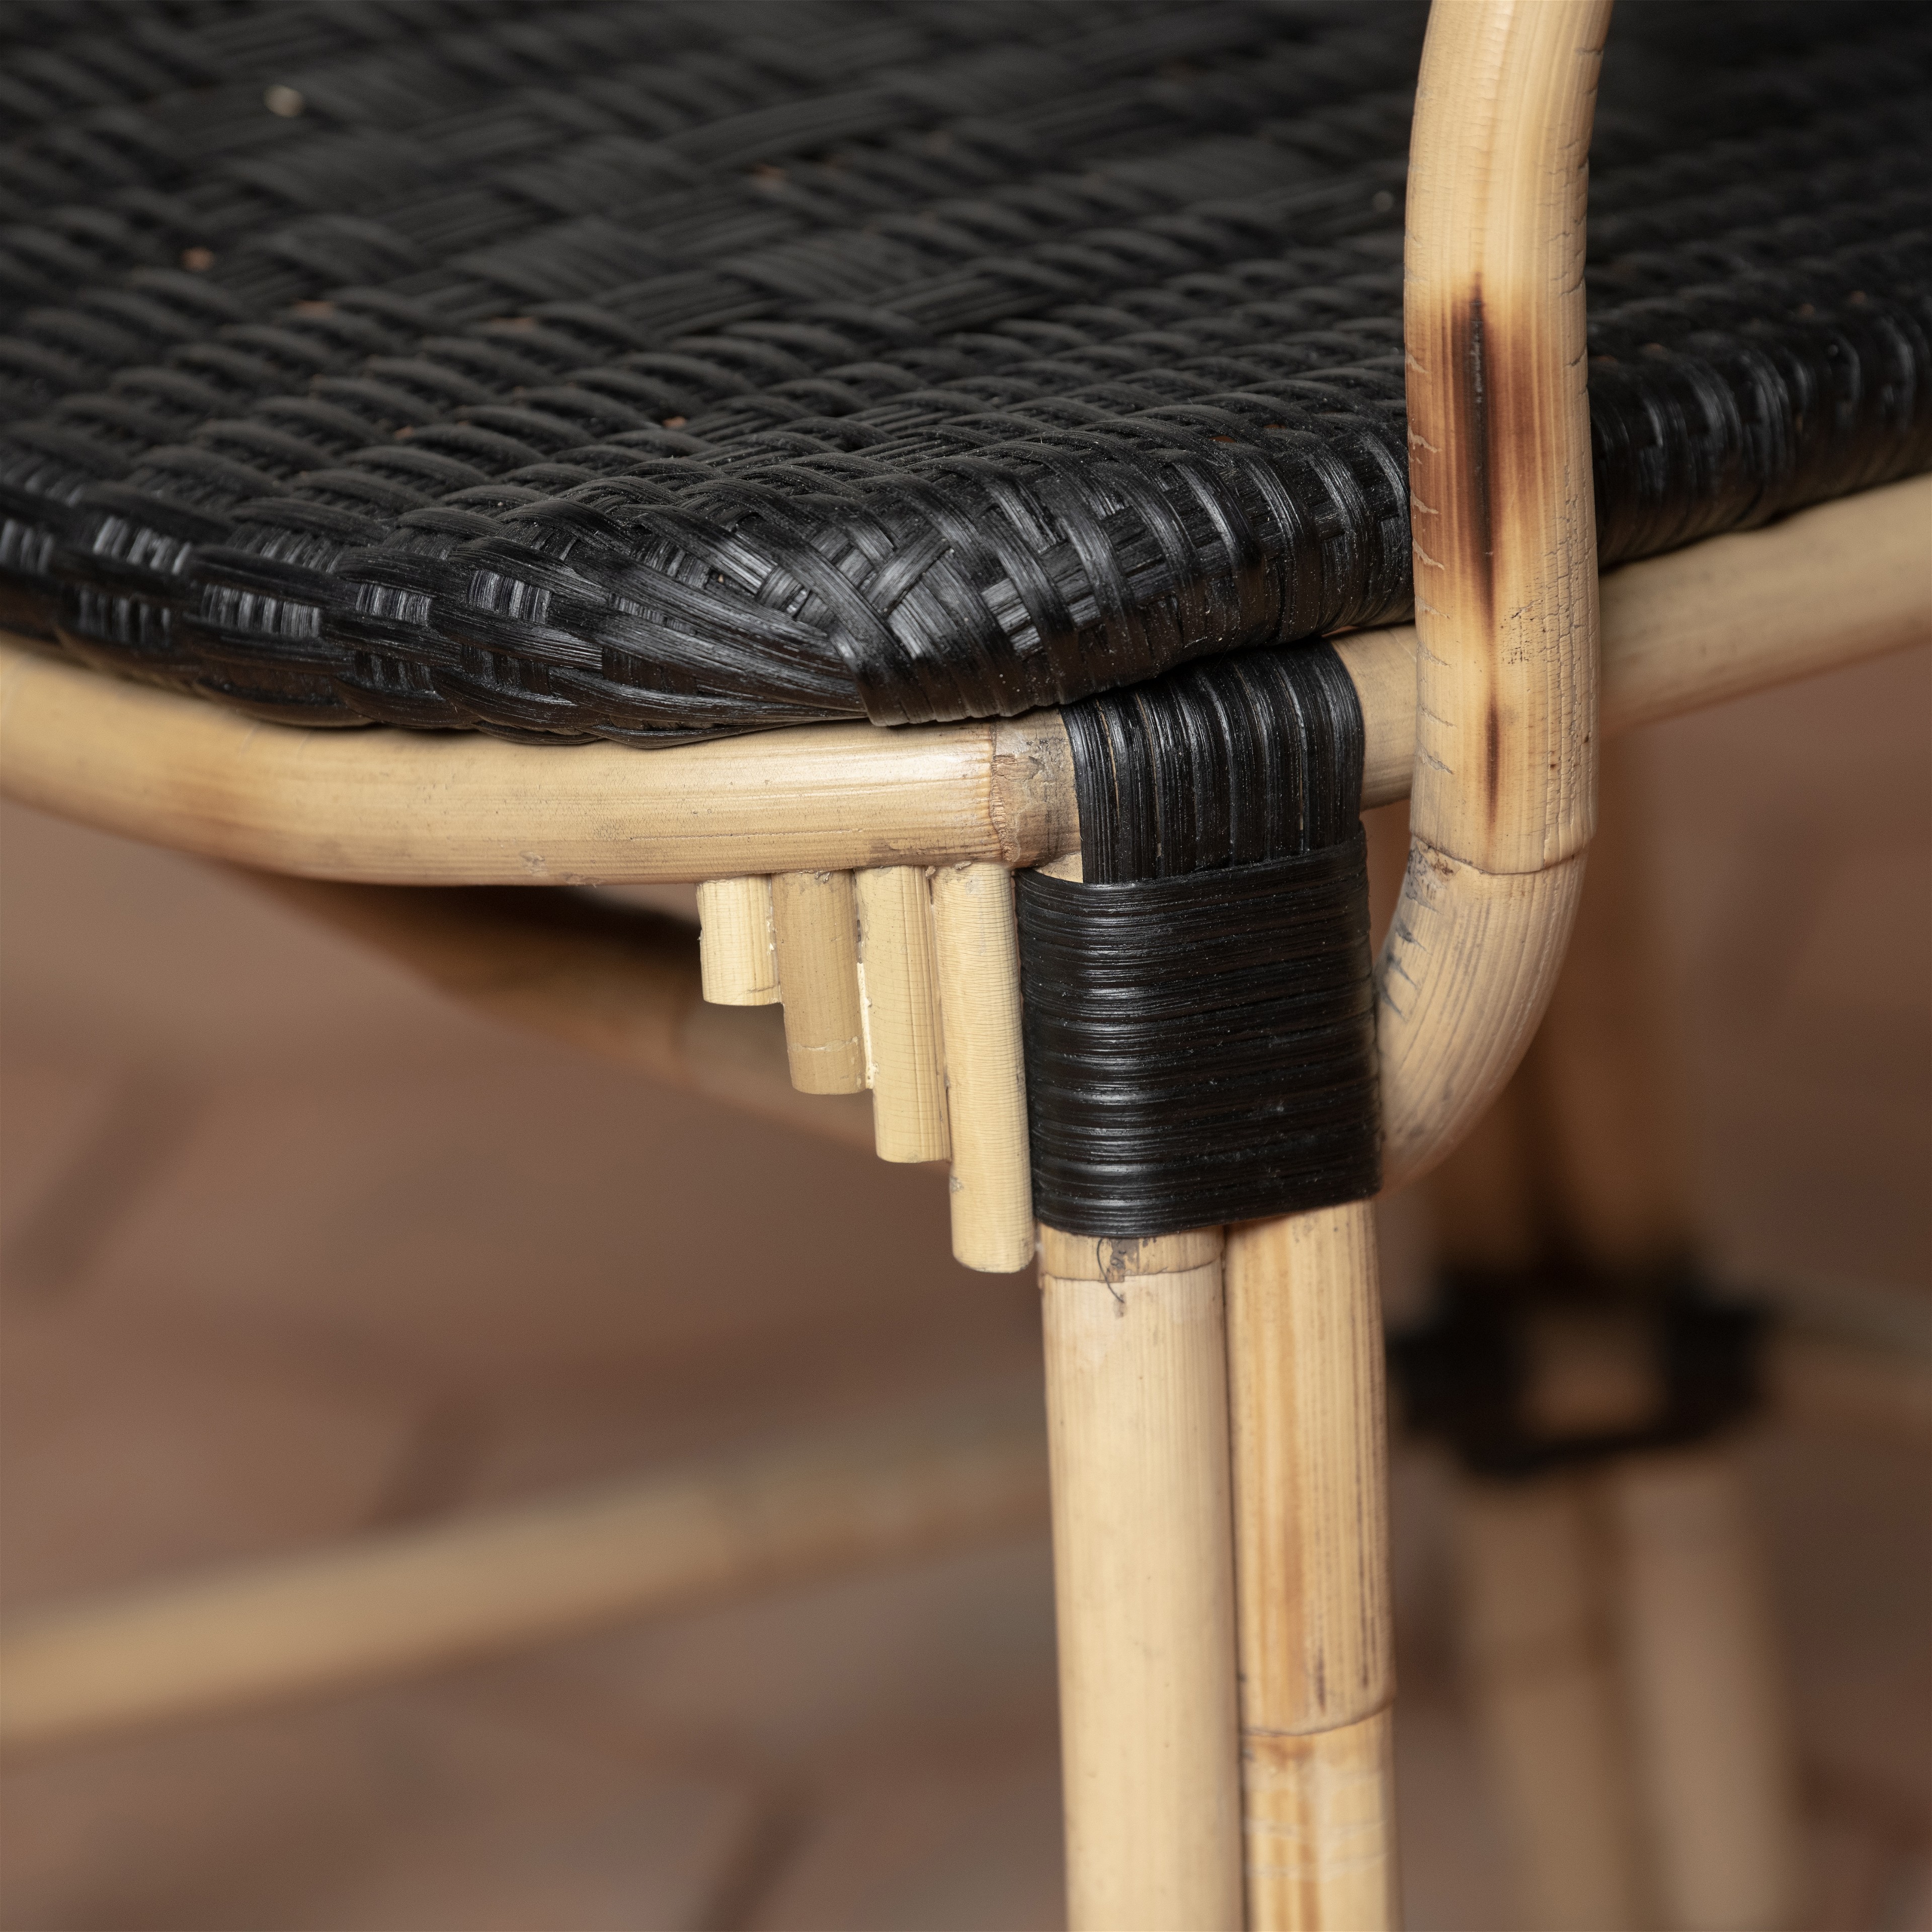 a close up of a black wicker chair